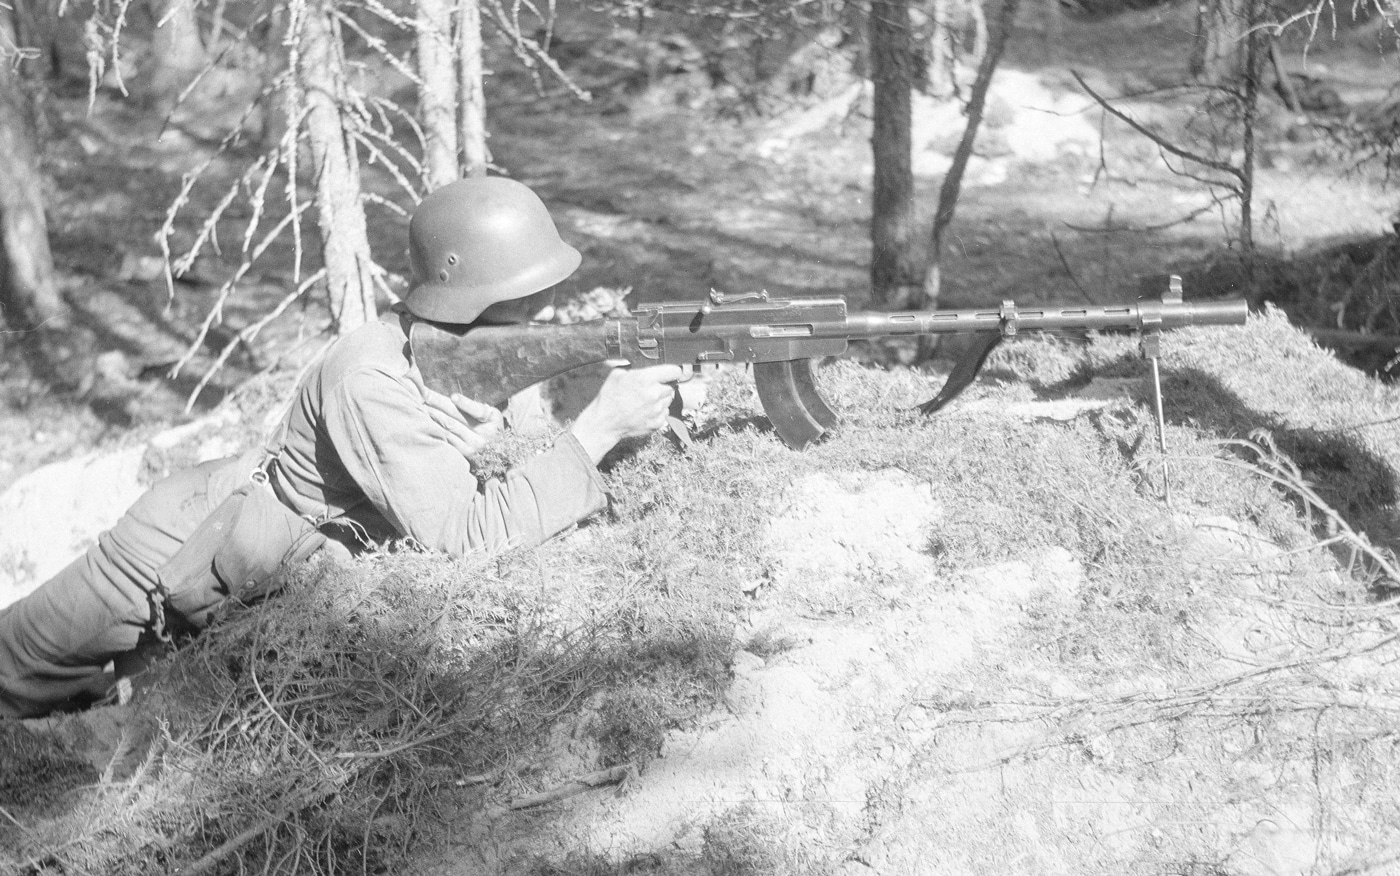 In this photo, a soldier of the Finland Army assumes a prone defensive position with his machine gun to repel communist troops from the Soviet Union. The gun used a short recoil operation and automatic firing to produce a high firing rate. While the gun could come with a drum magazine, most Finnish troops were issued 20-round box-style magazines. The innovative design was largely in part due to Finnish inventor and co-designer Arvo Saloranta.